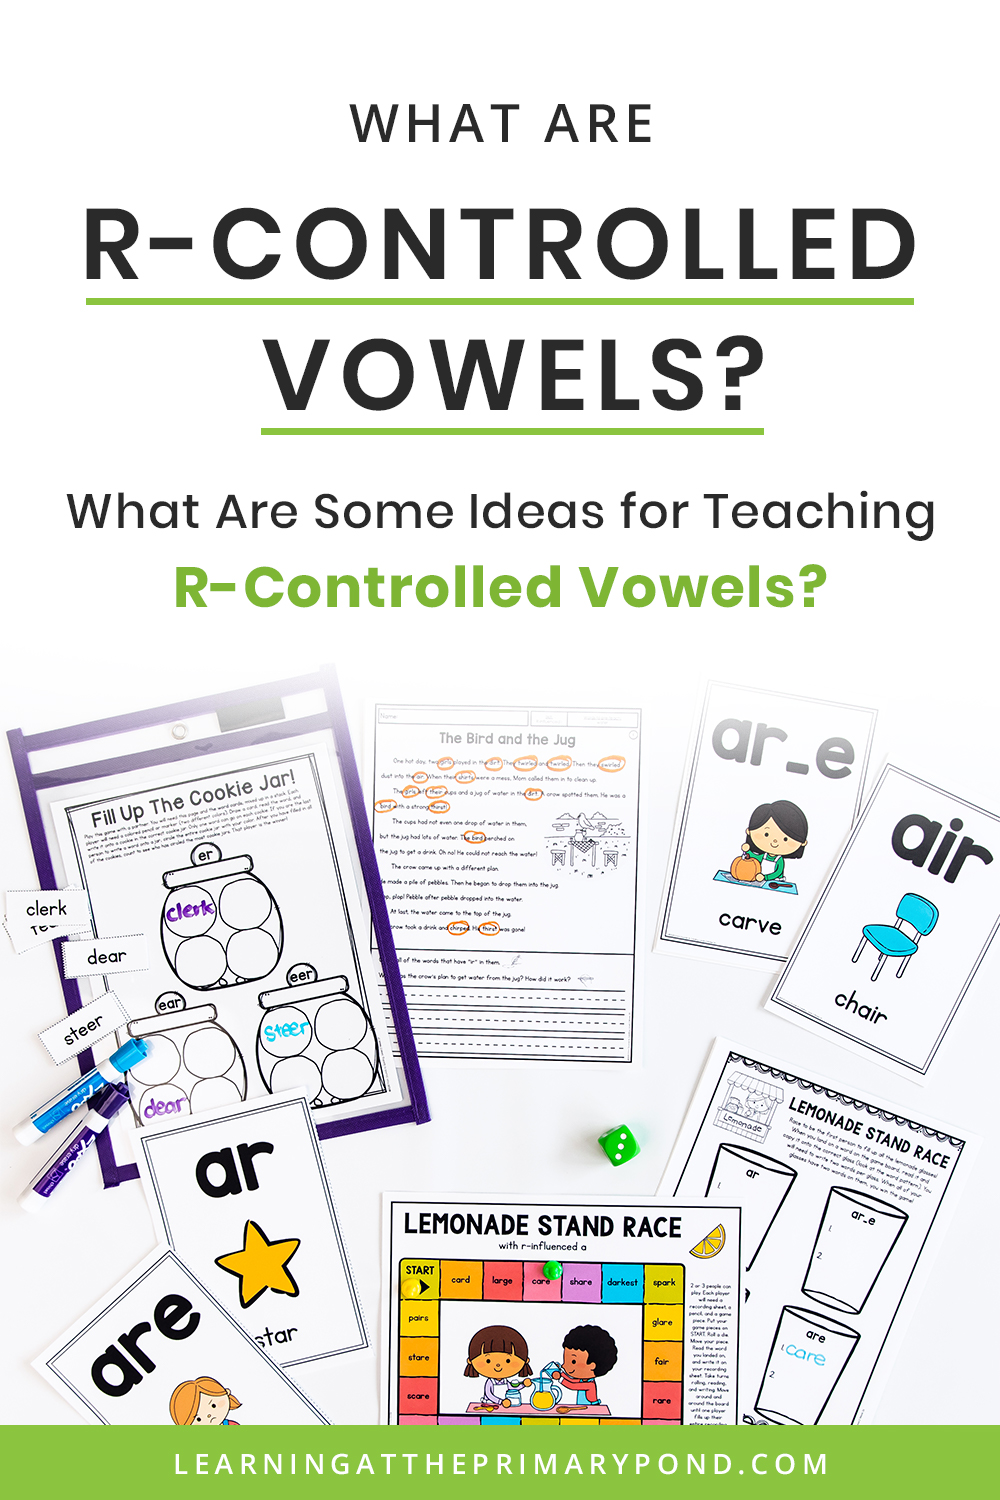 What Are R-Controlled Vowels? What Are Some Ideas for Teaching R